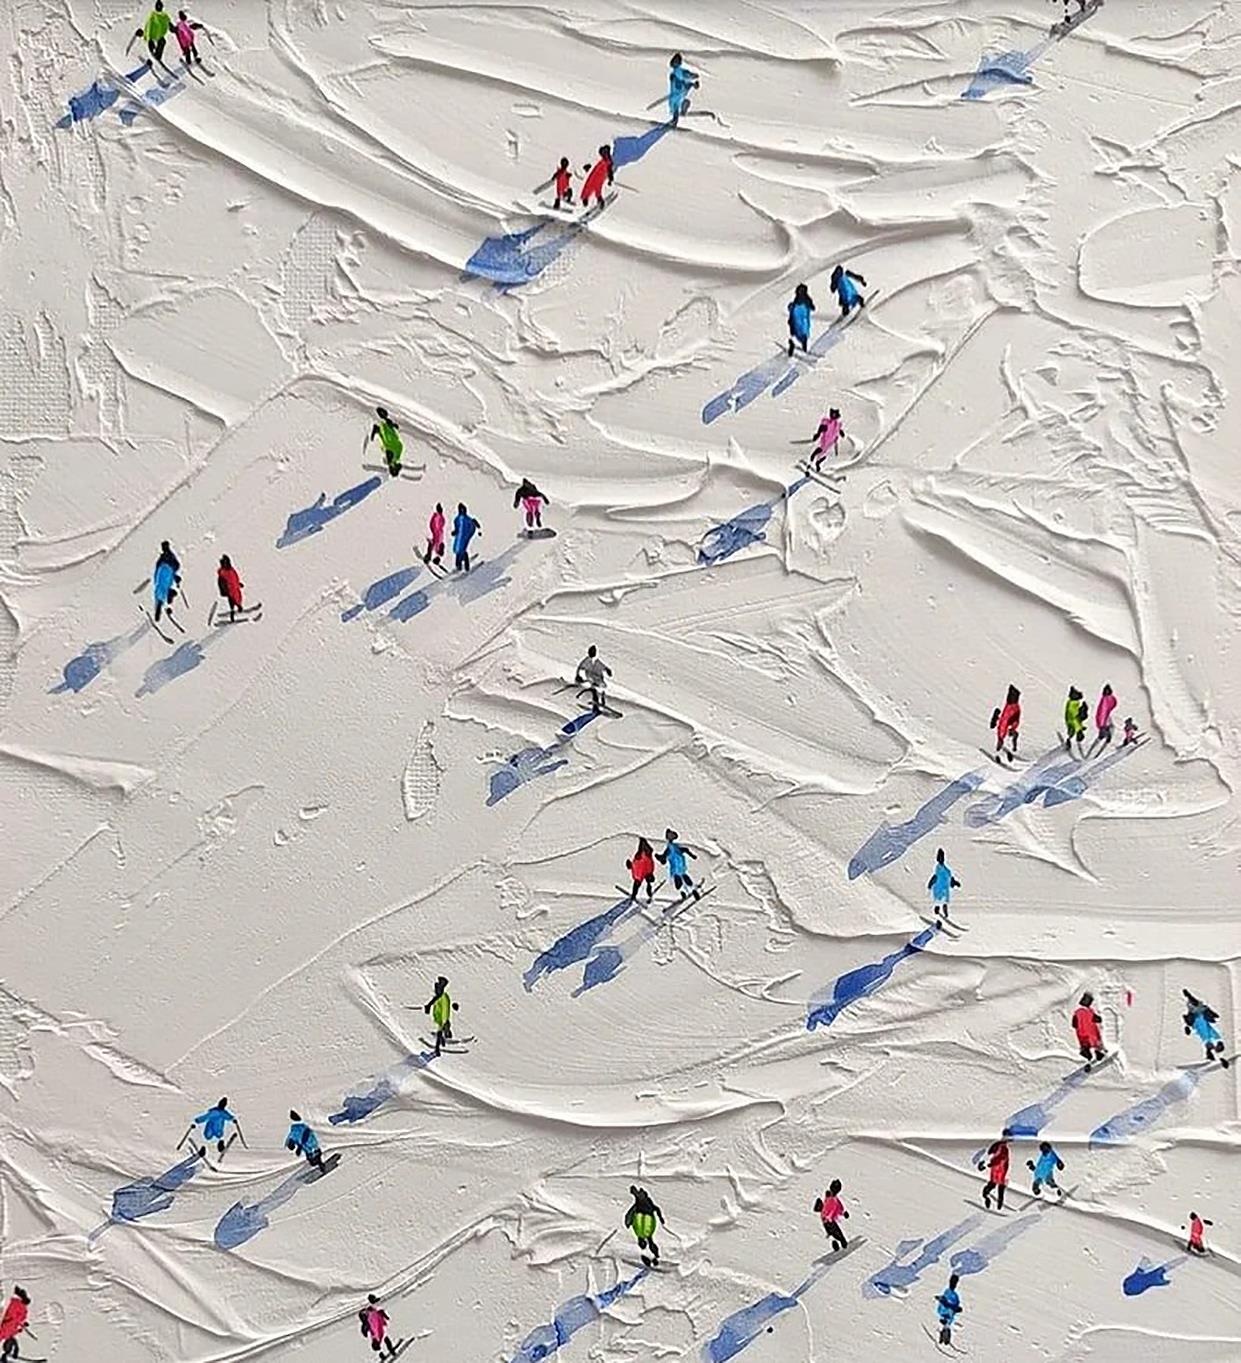 Skier on Snowy Mountain Wall Art Sport White Snow Skiing Room Decor by Knife 04 Oil Paintings